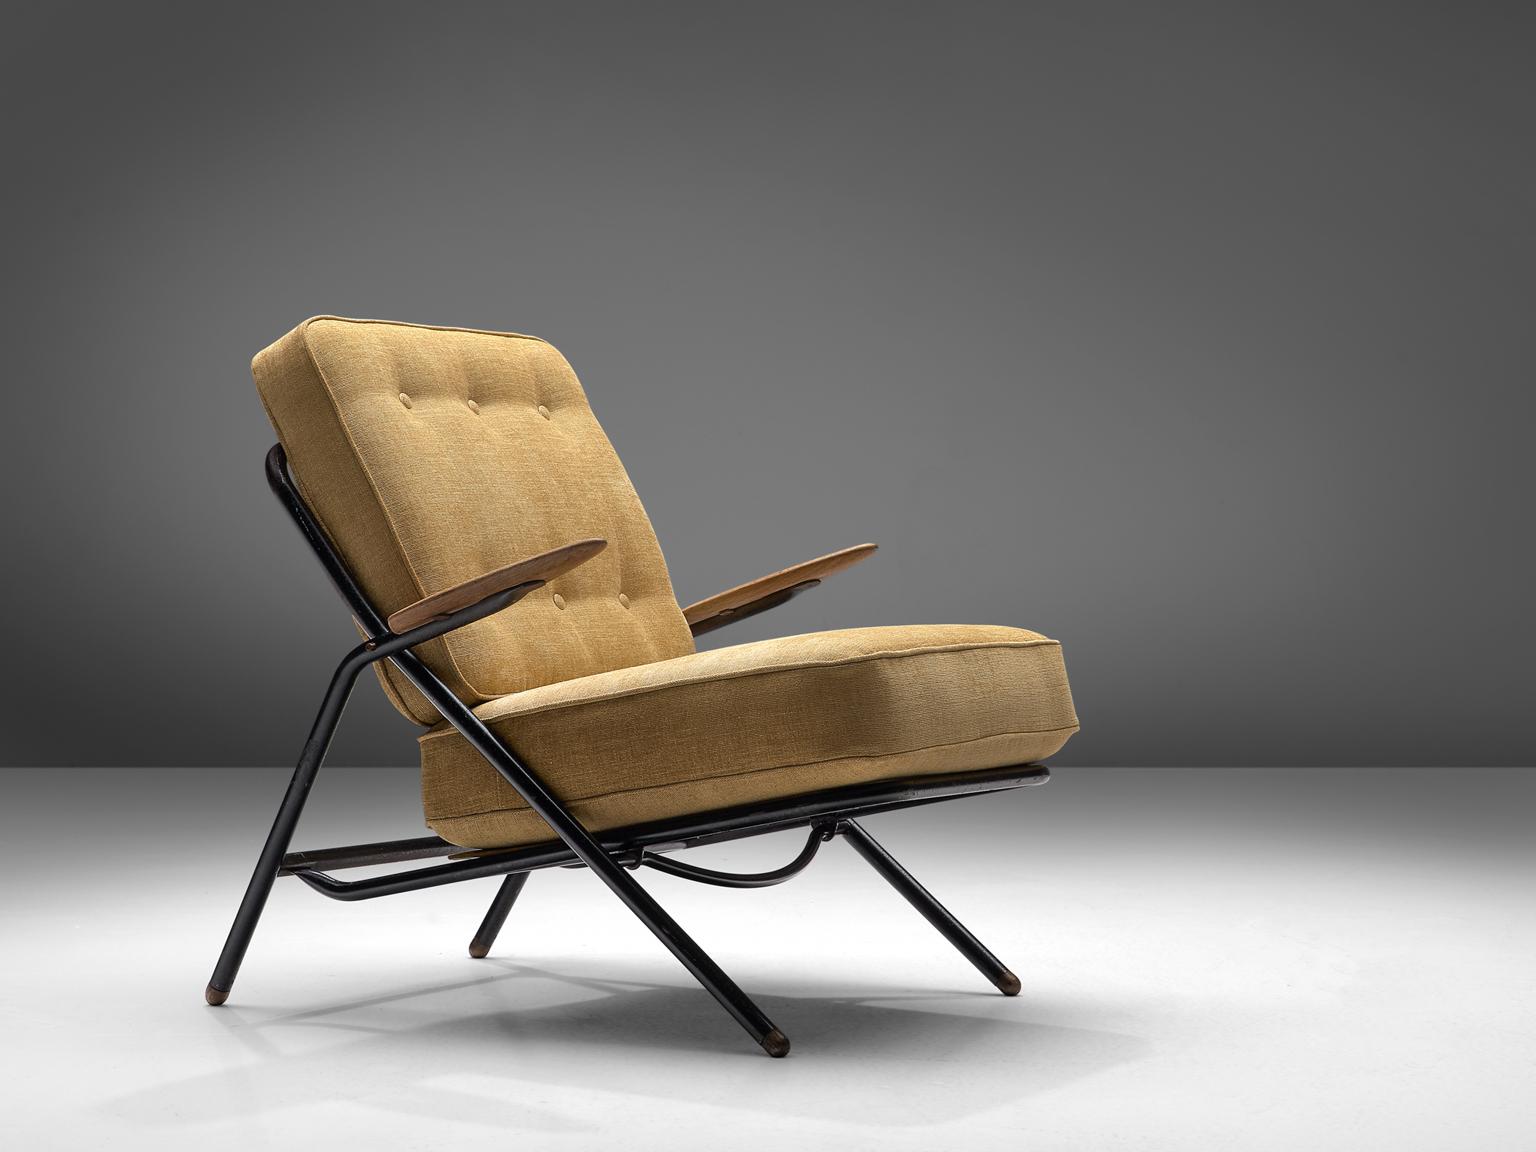 Are a shape used earlier by Wegner on the CH28. It's an elegant addition to the steel and sturdy appearance of this easy chair. Another great detail is the 'W' on the back.
Another noteworthy detail are the wooden feet.

This chair is recently